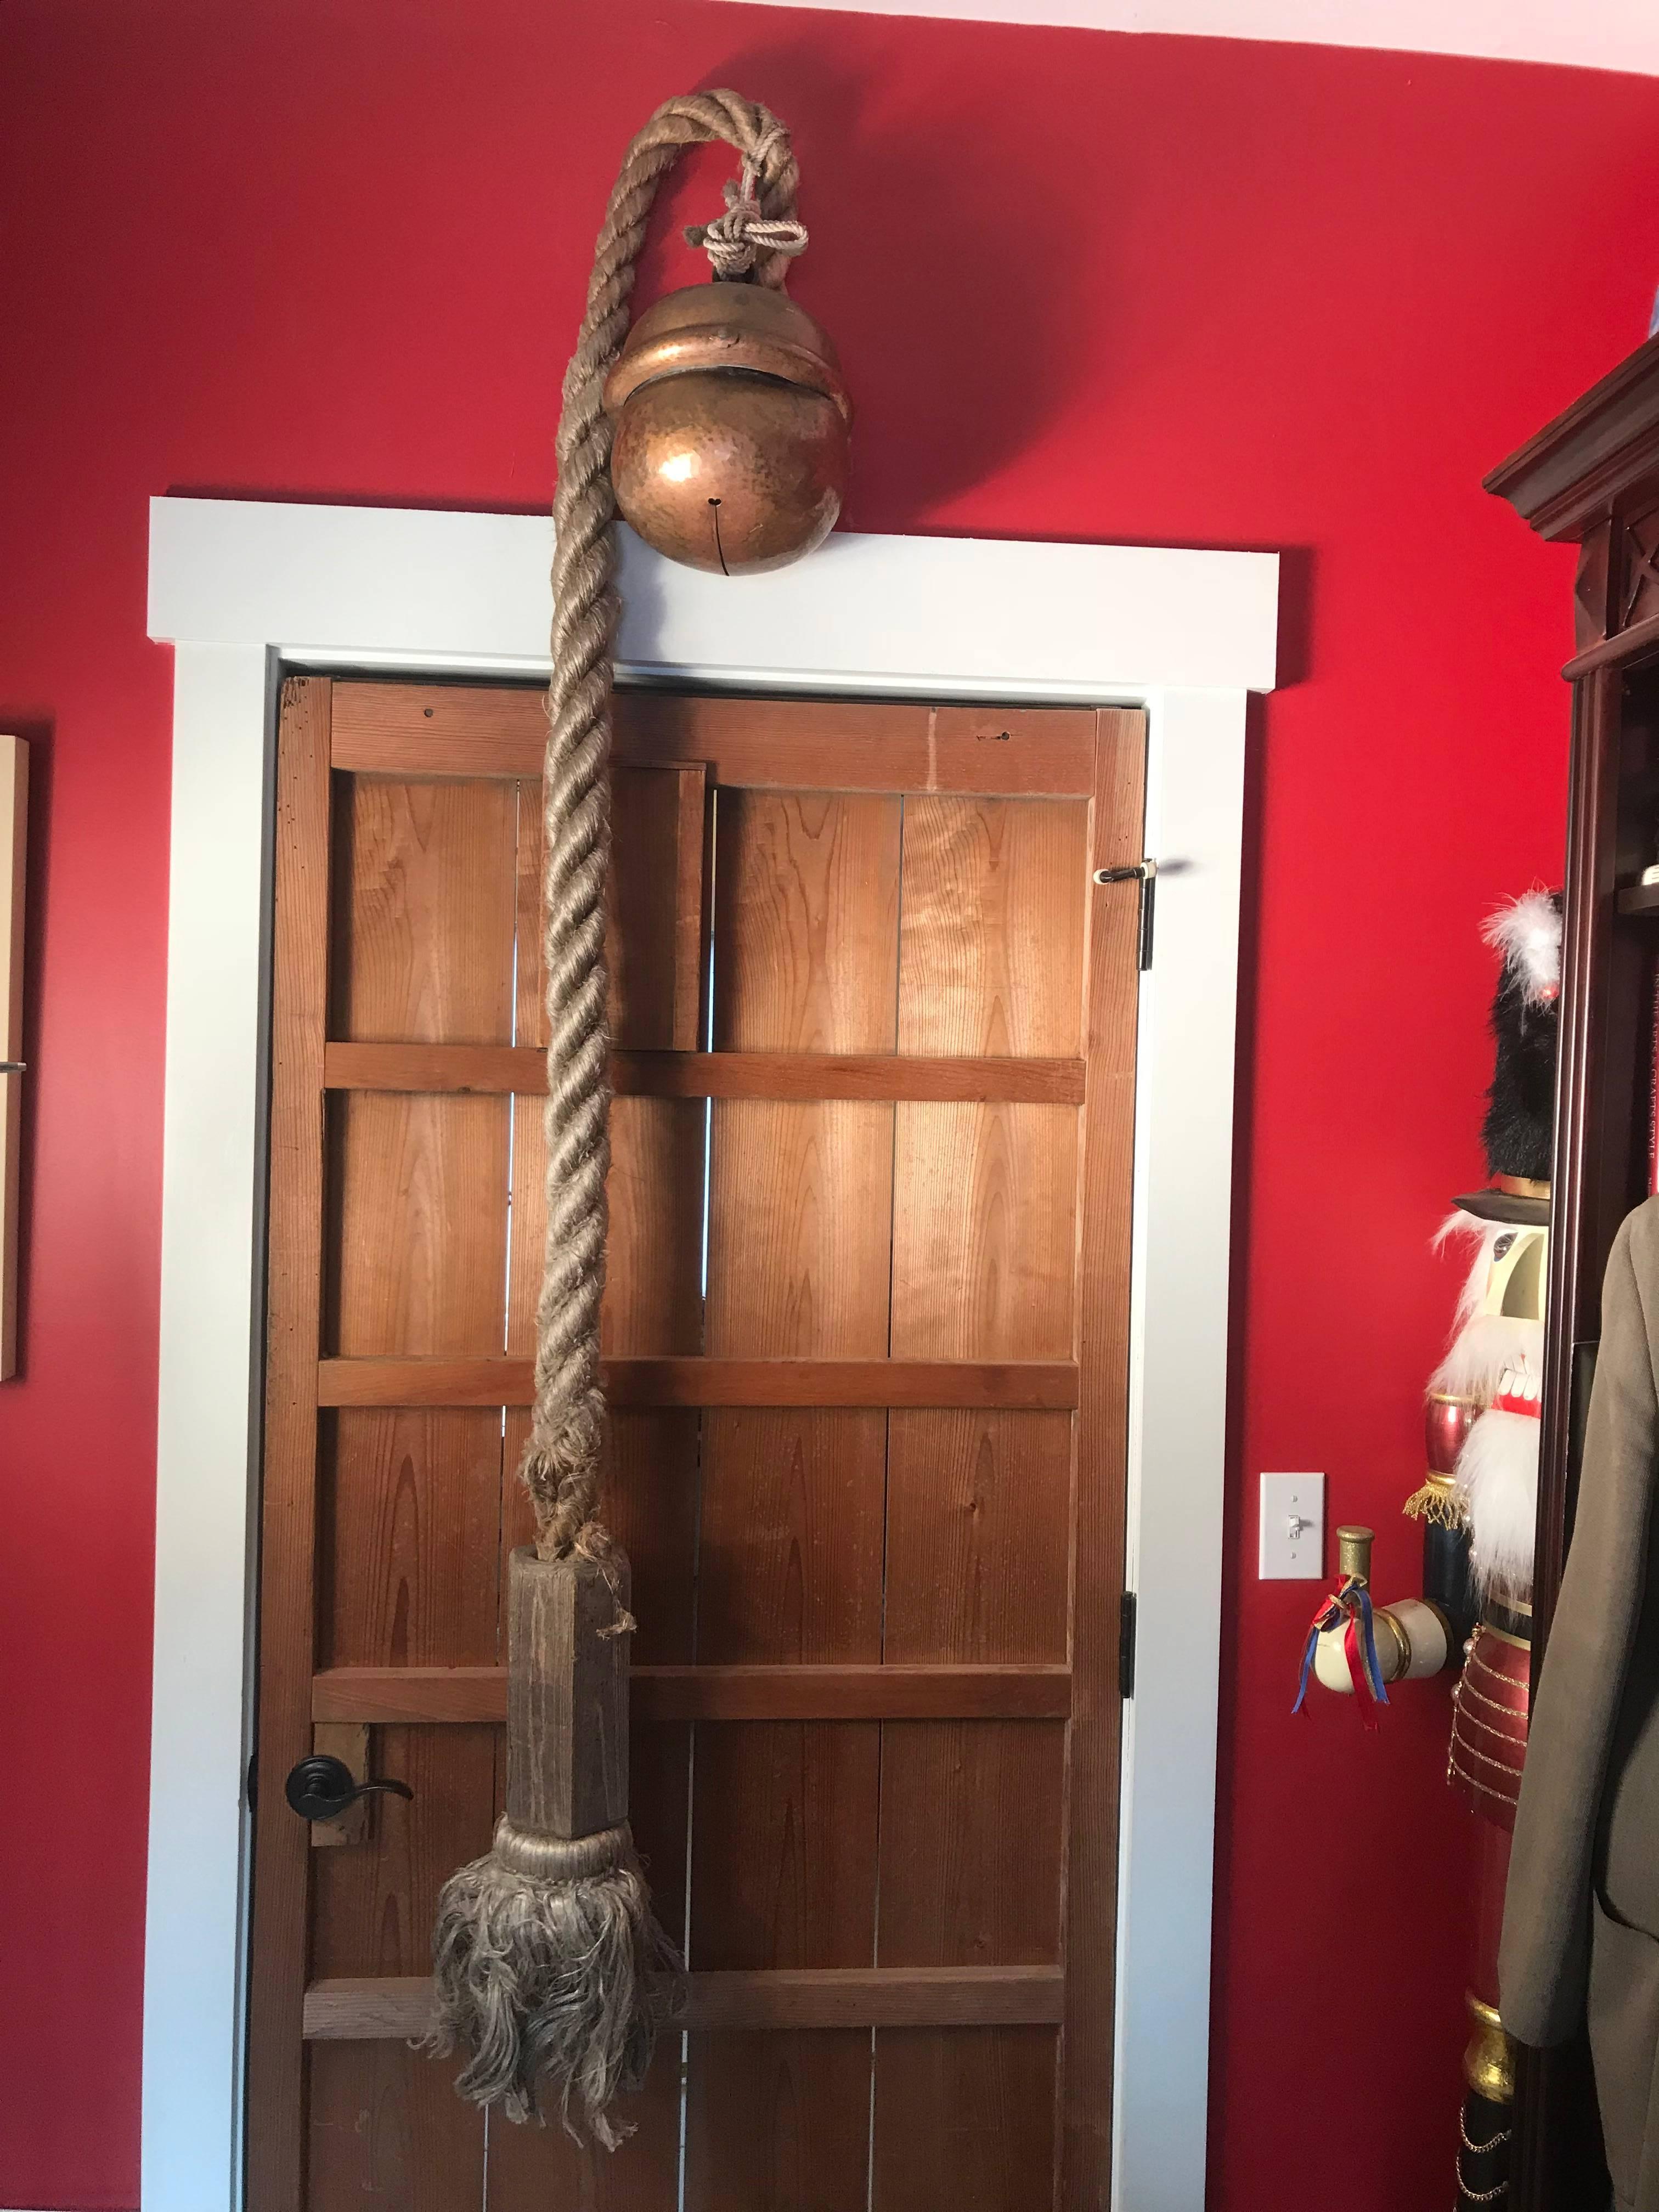 Here's an extraordinary opportunity to collect and acquire a Japanese authentic hand cast copper Shinto Suzu bell complete with its original thick pull rope and massive wooden handle. The bell is signed by its multiple original donors from the